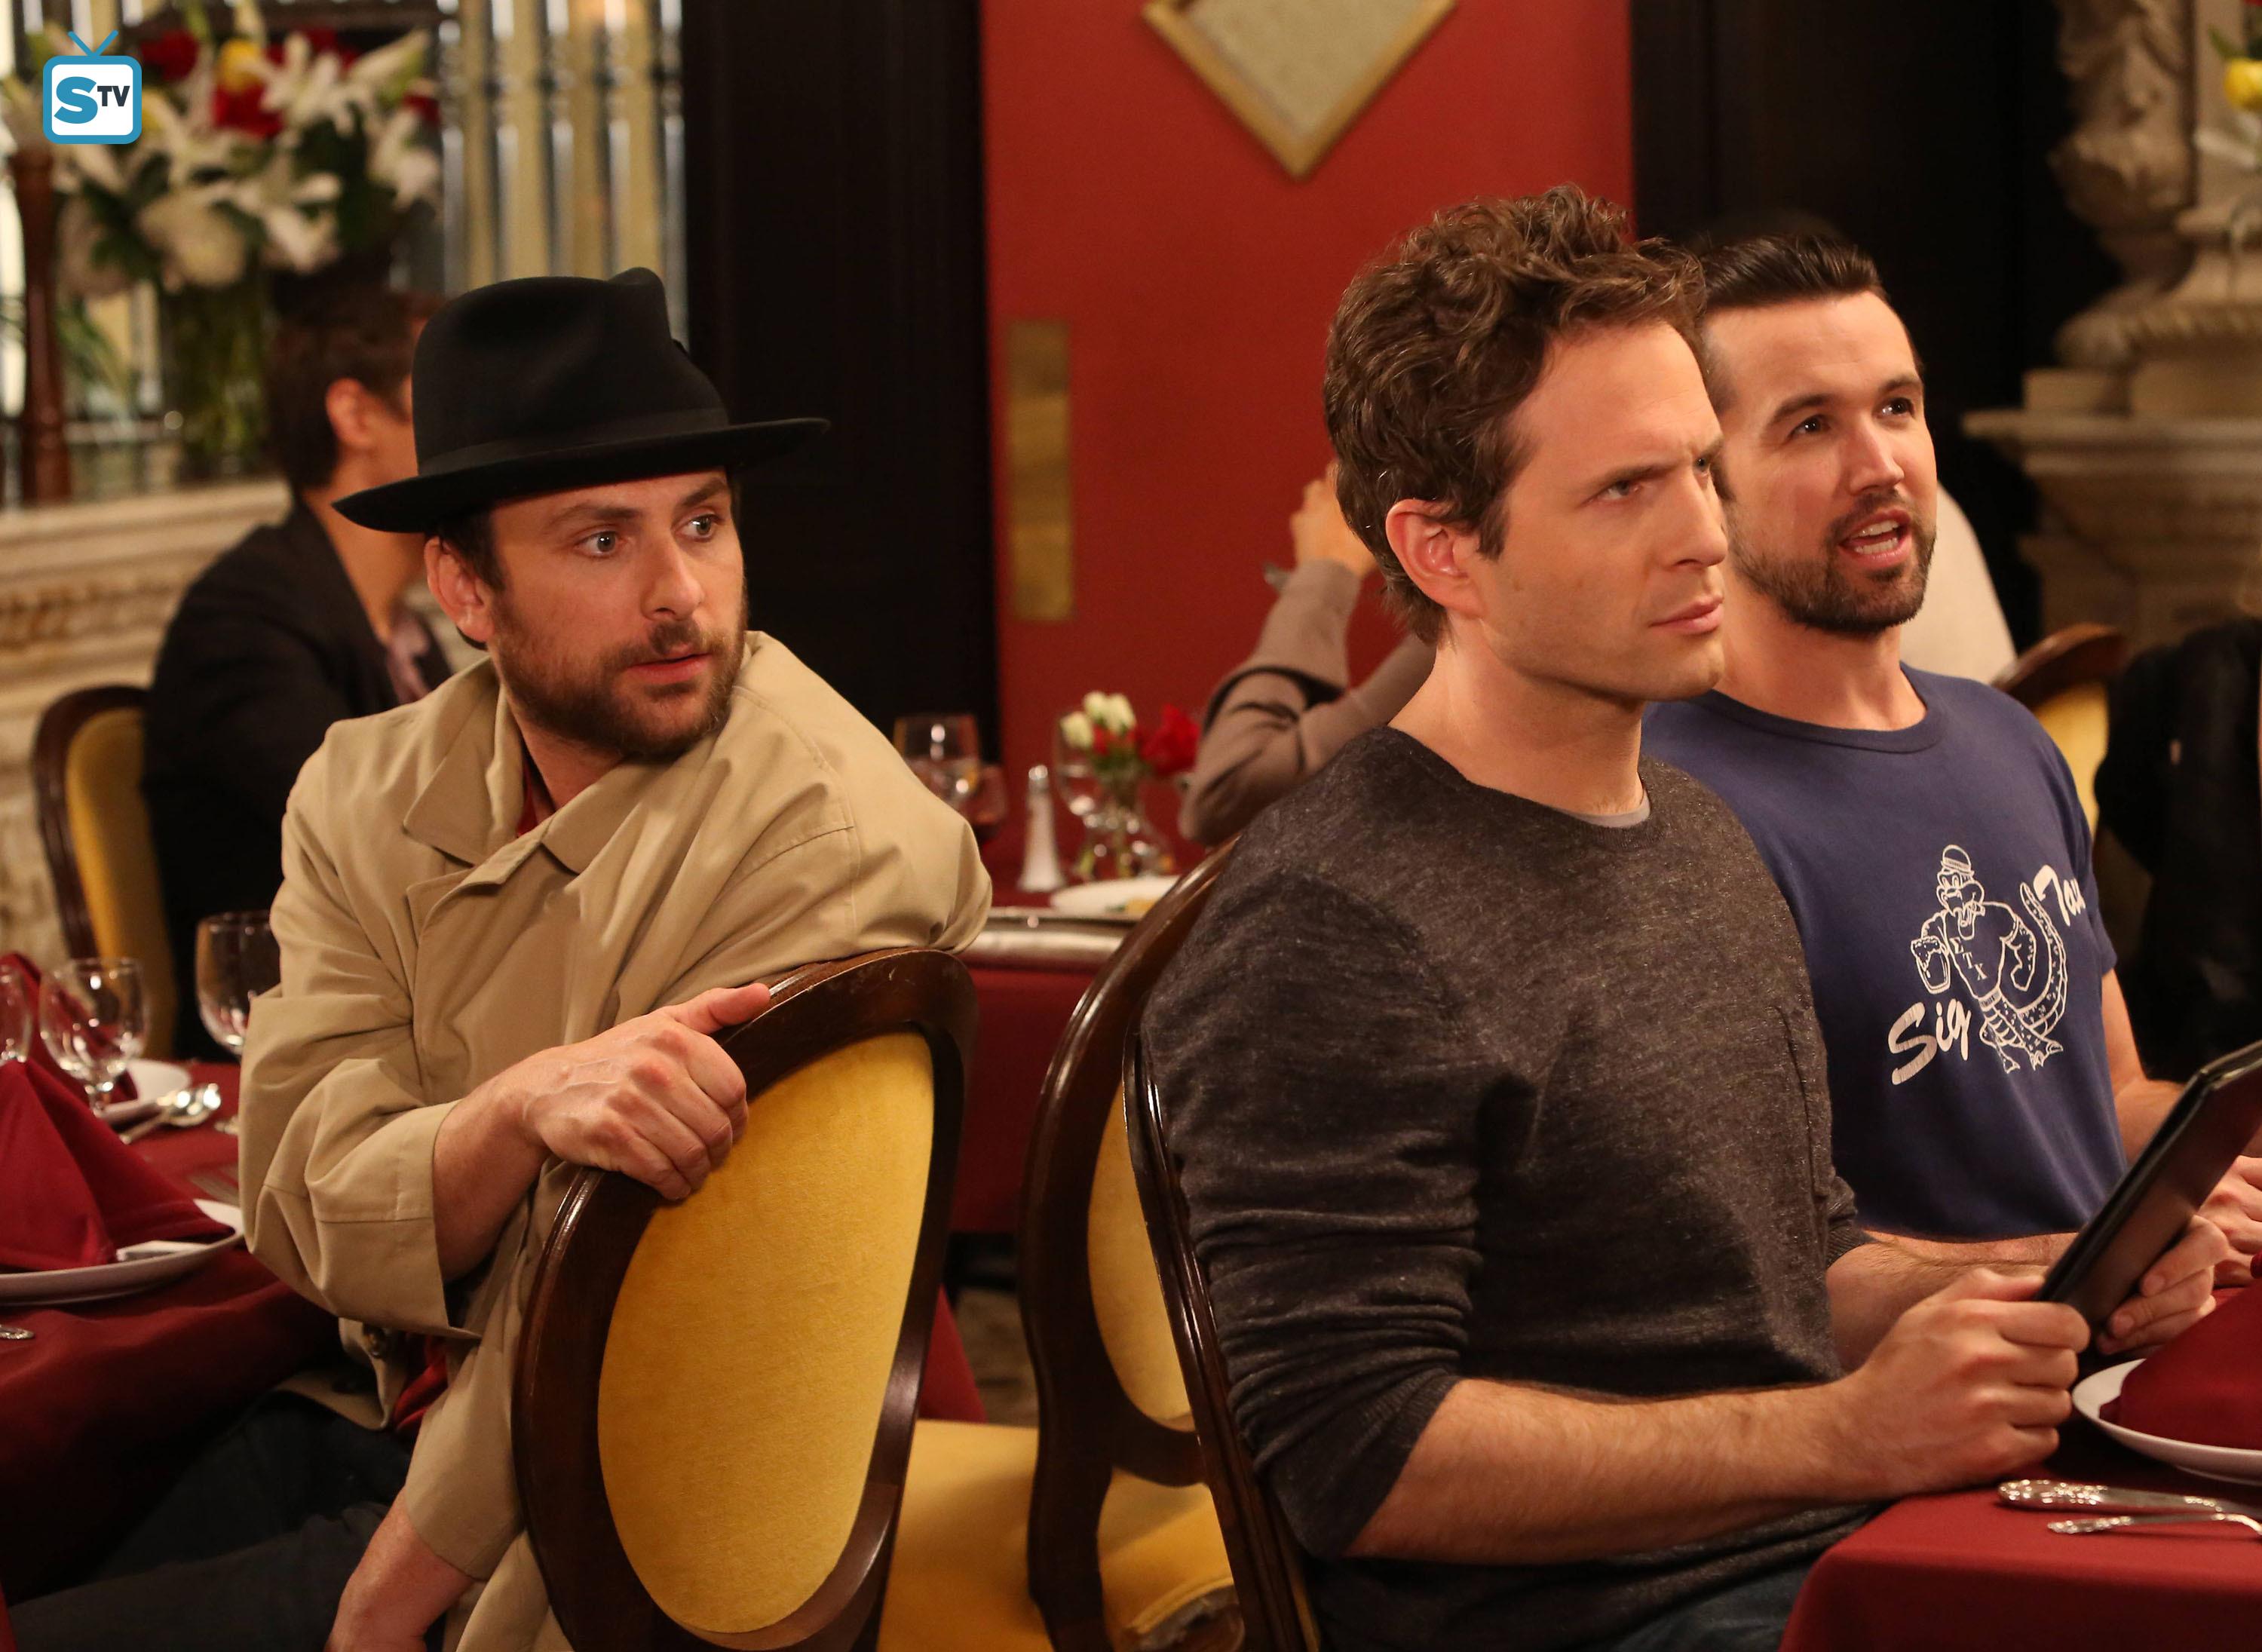 Watch Charlie Day Goes Undercover on Twitter, Wikipedia & Quora